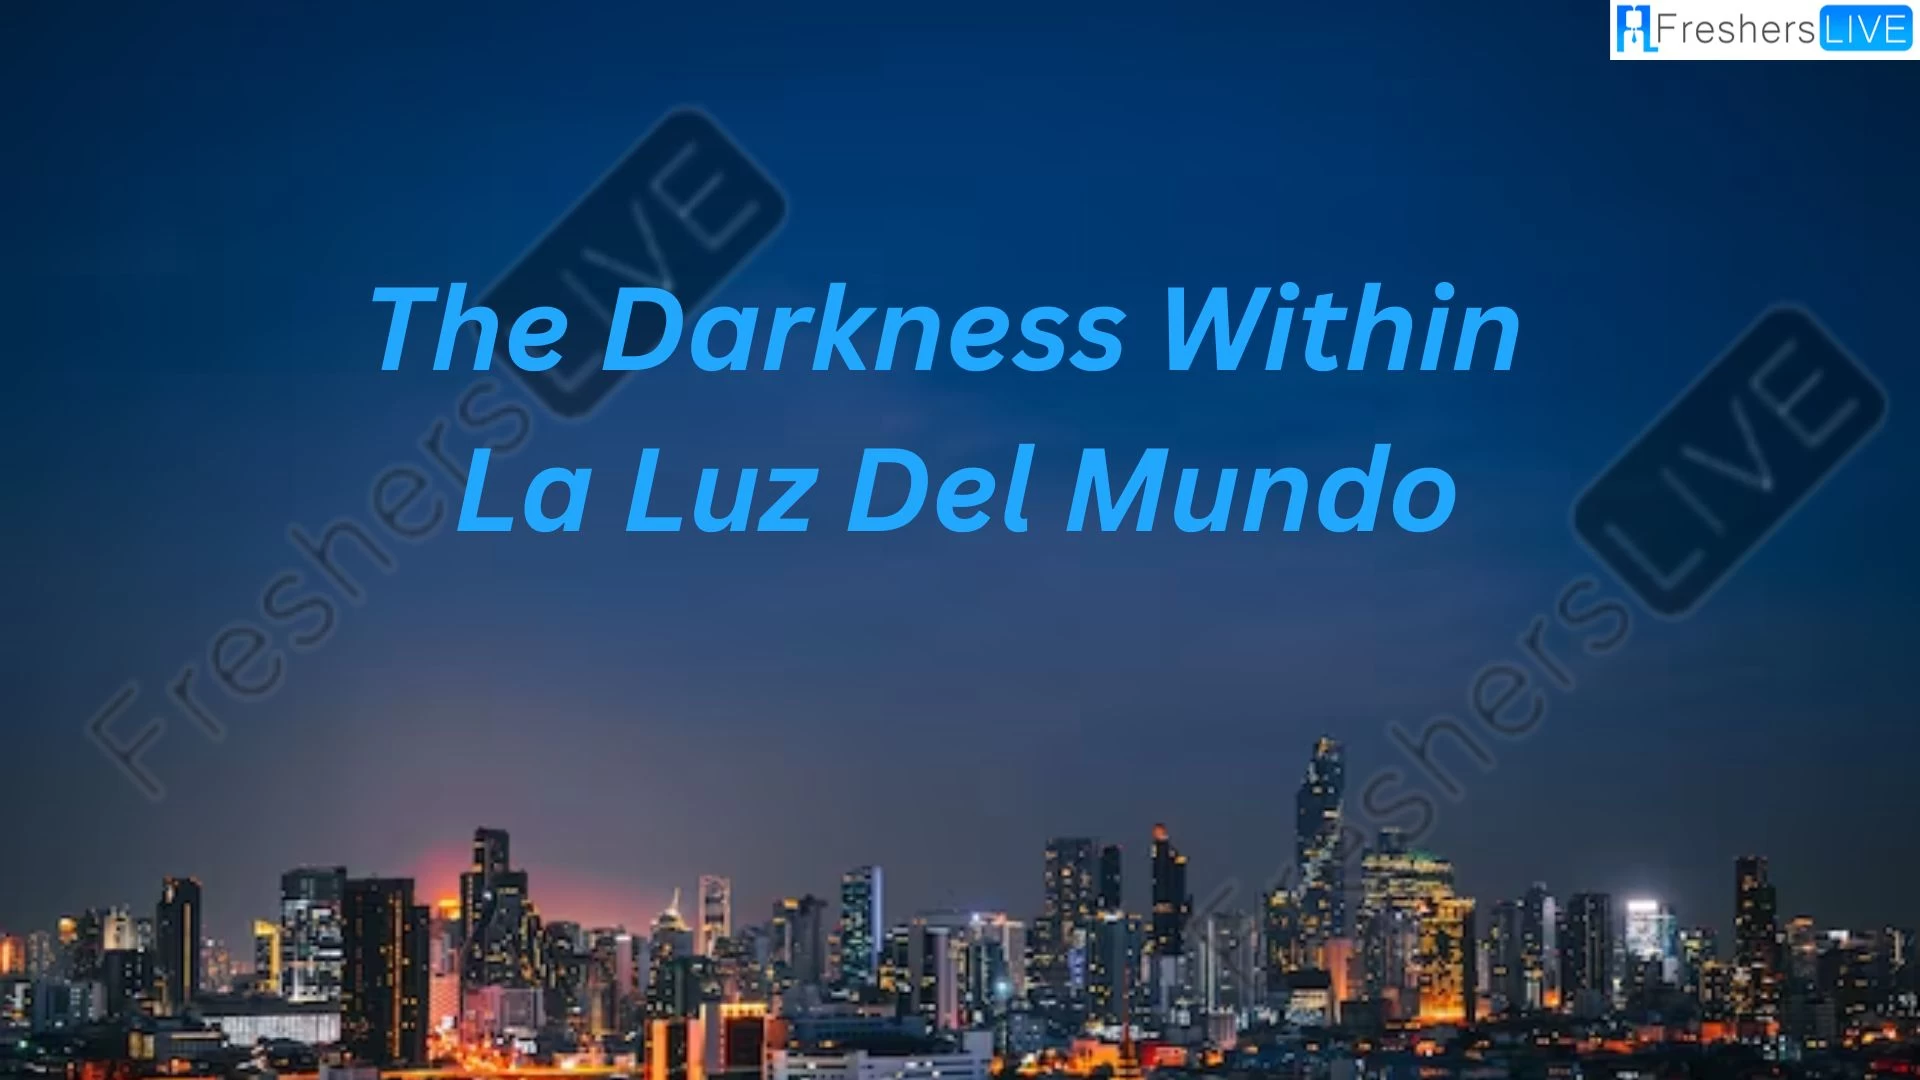 The Darkness Within La Luz Del Mundo OTT Release Date and Time Confirmed 2023: When is the 2023 The Darkness Within La Luz Del Mundo Movie Coming out on OTT Netflix?